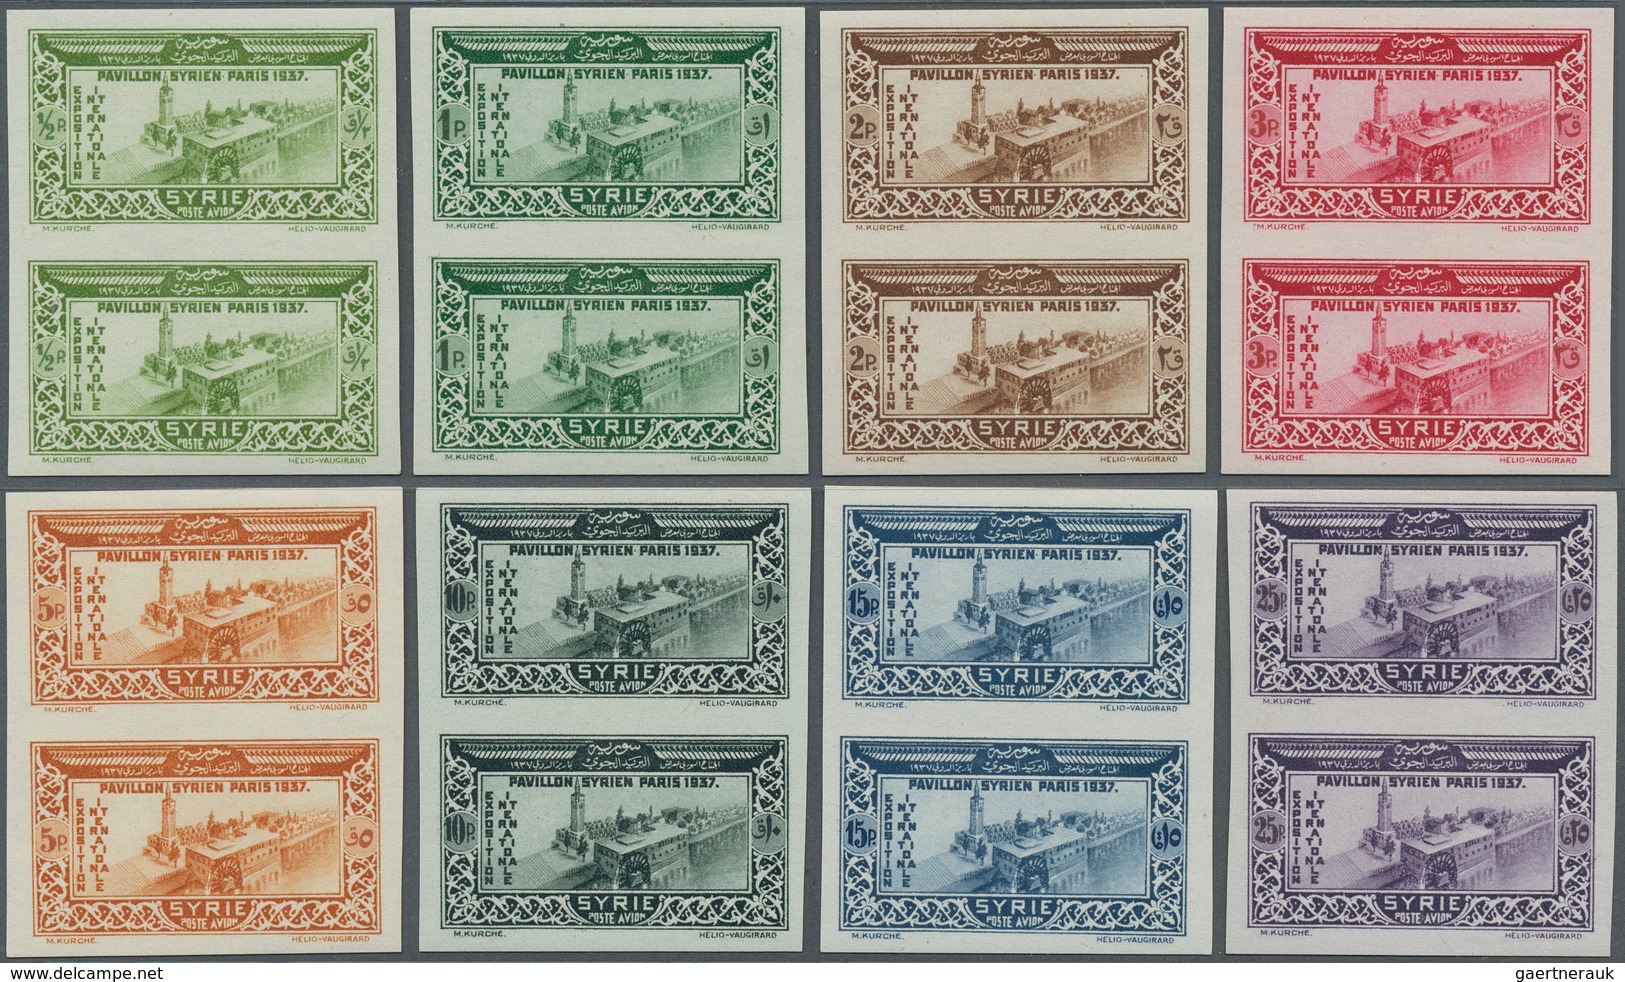 Syrien: 1937, EXPO PARIS Complete Set Of 8 Values Imperf Pairs, Mint Never Hinged In Very Good Quali - Syrien